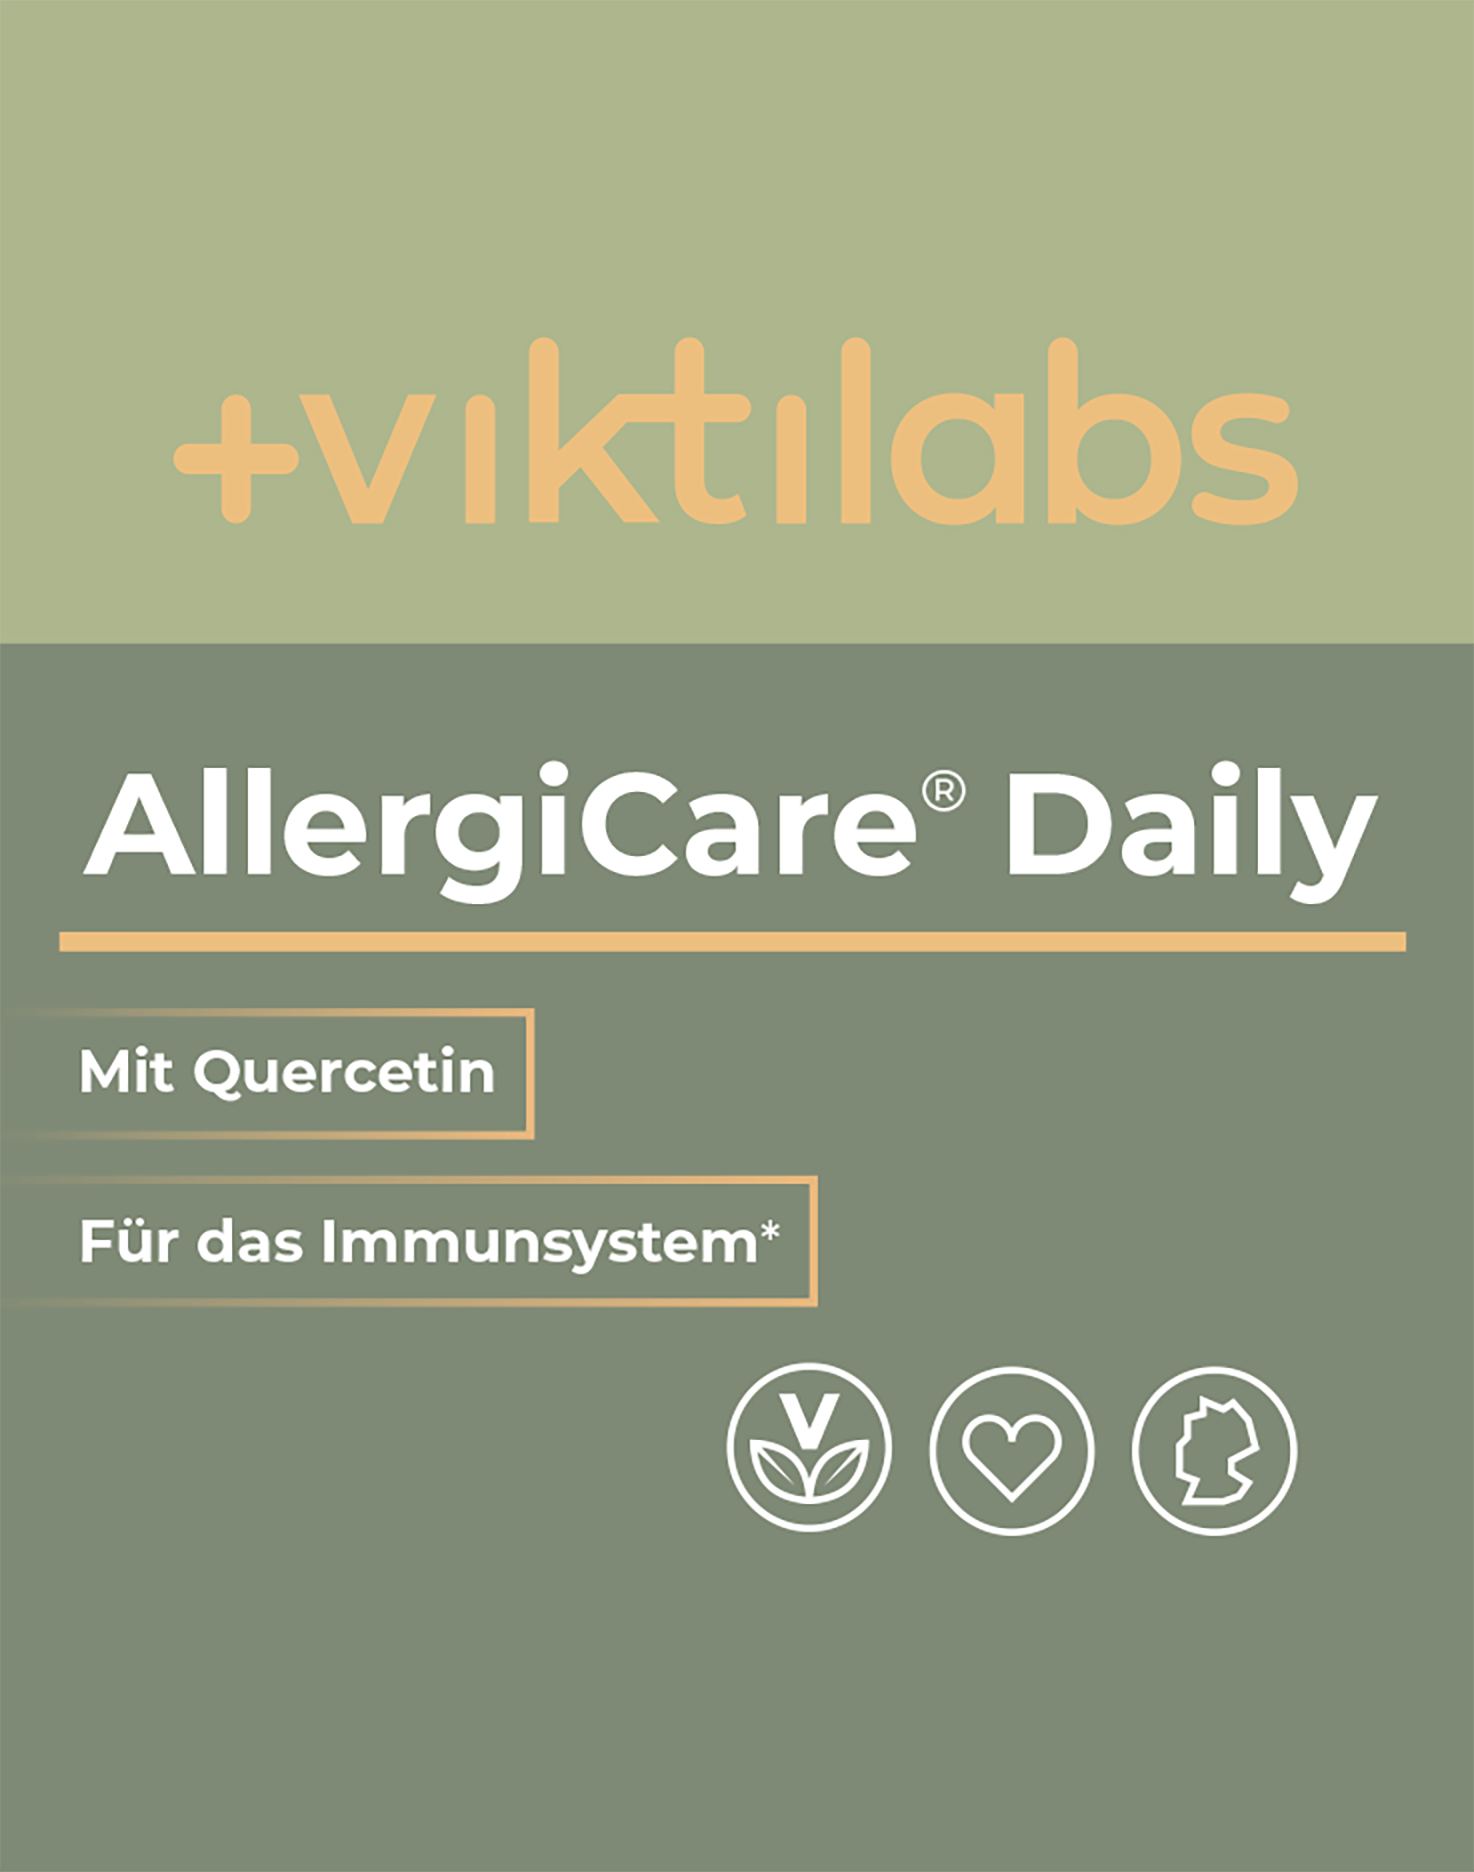 AllergiCare® Daily - 120 Kapseln